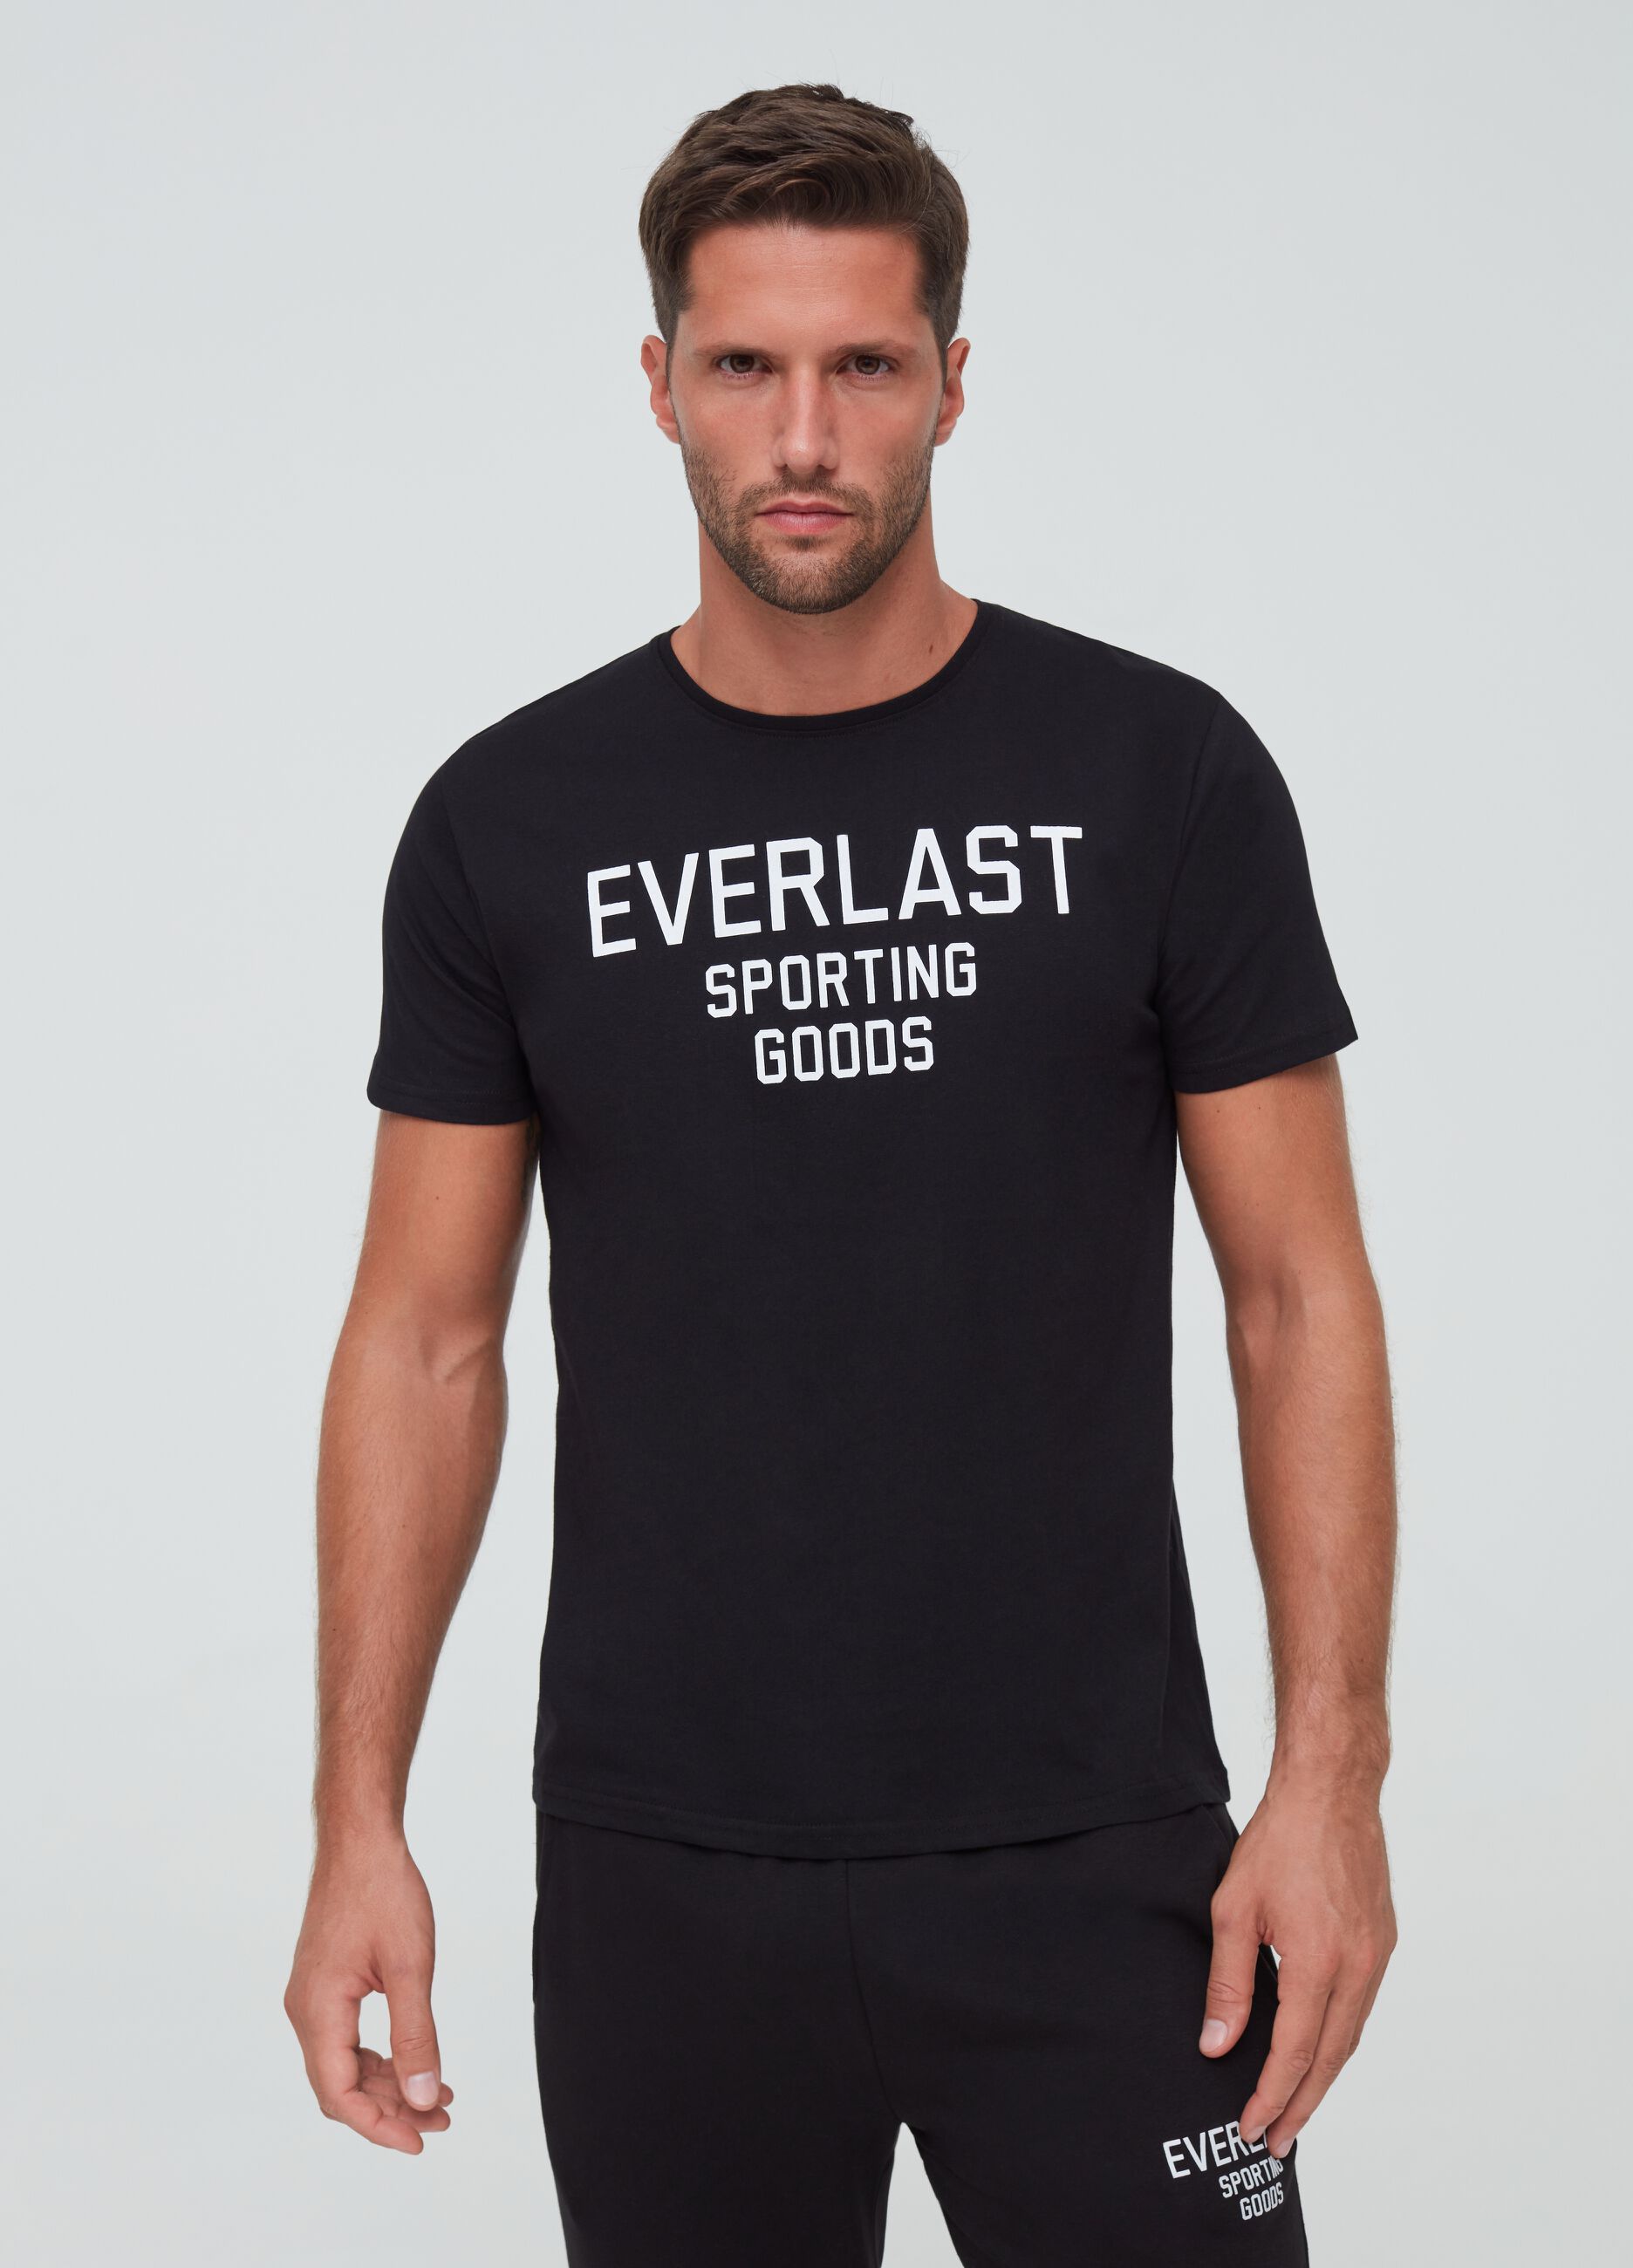 T-shirt in 100% cotton with Everlast print